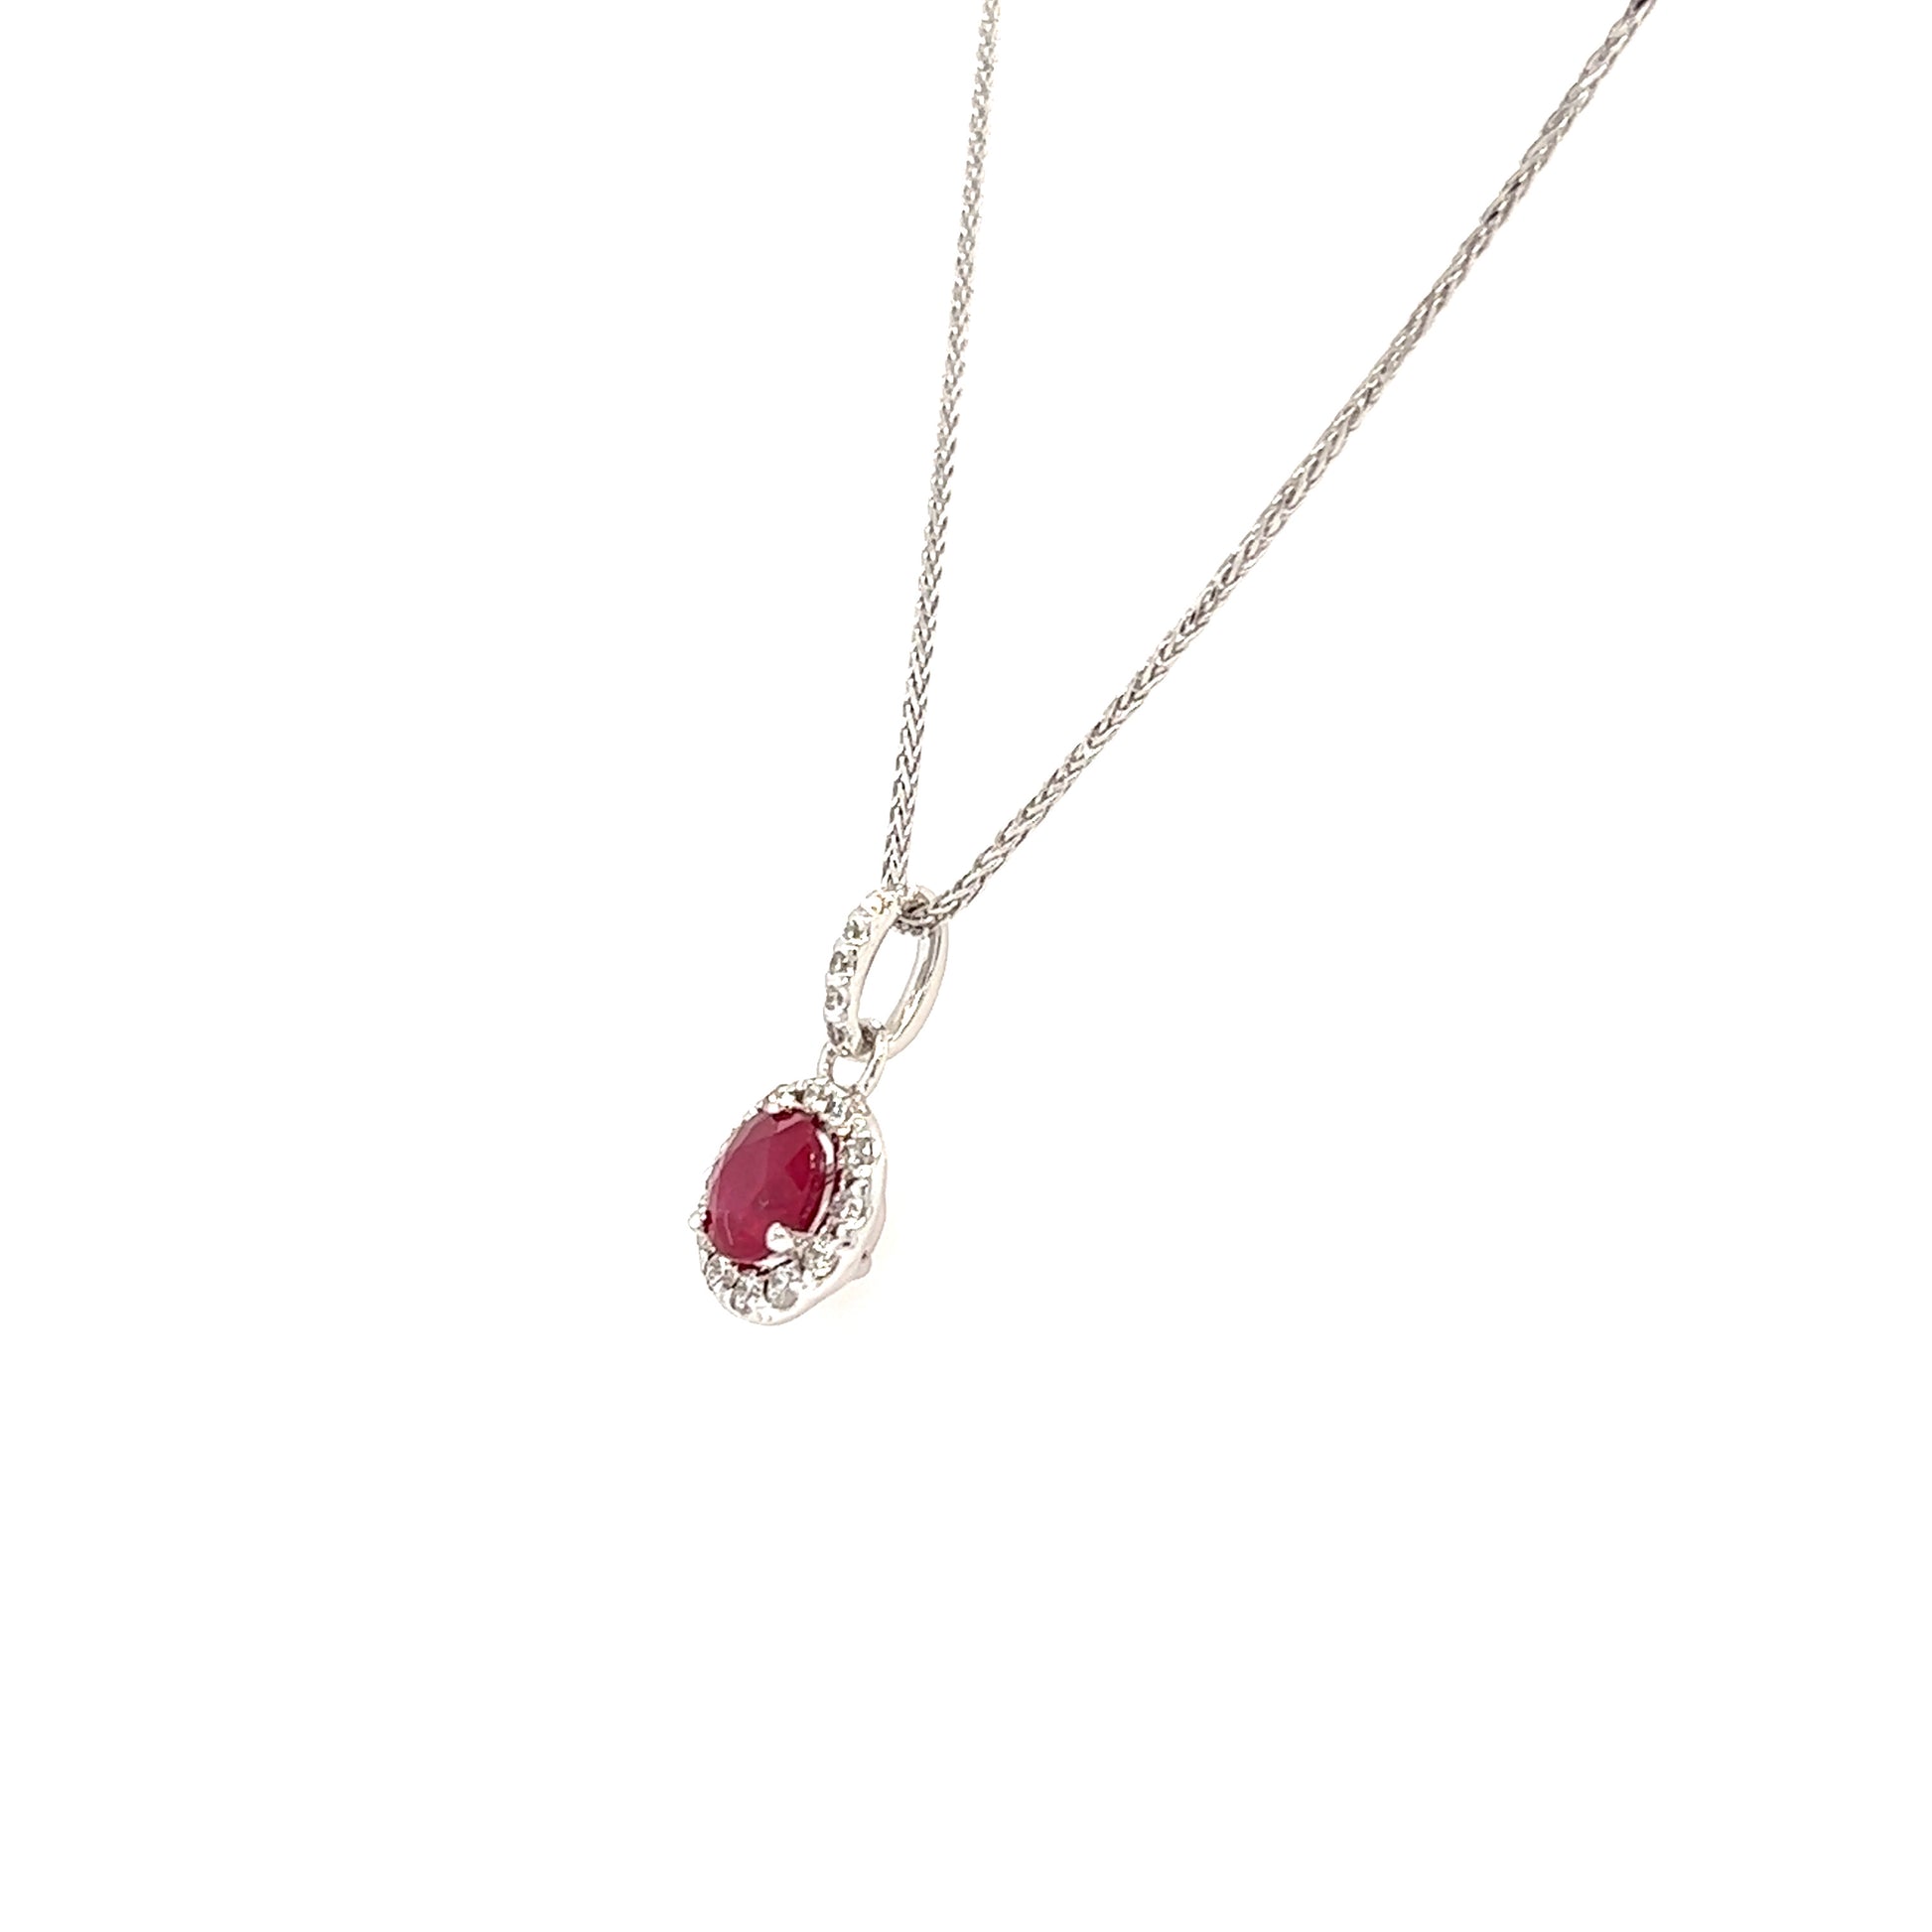 Round Ruby Pendant with Diamond Halo in 14K White Gold Pendant and Chain Right Side View